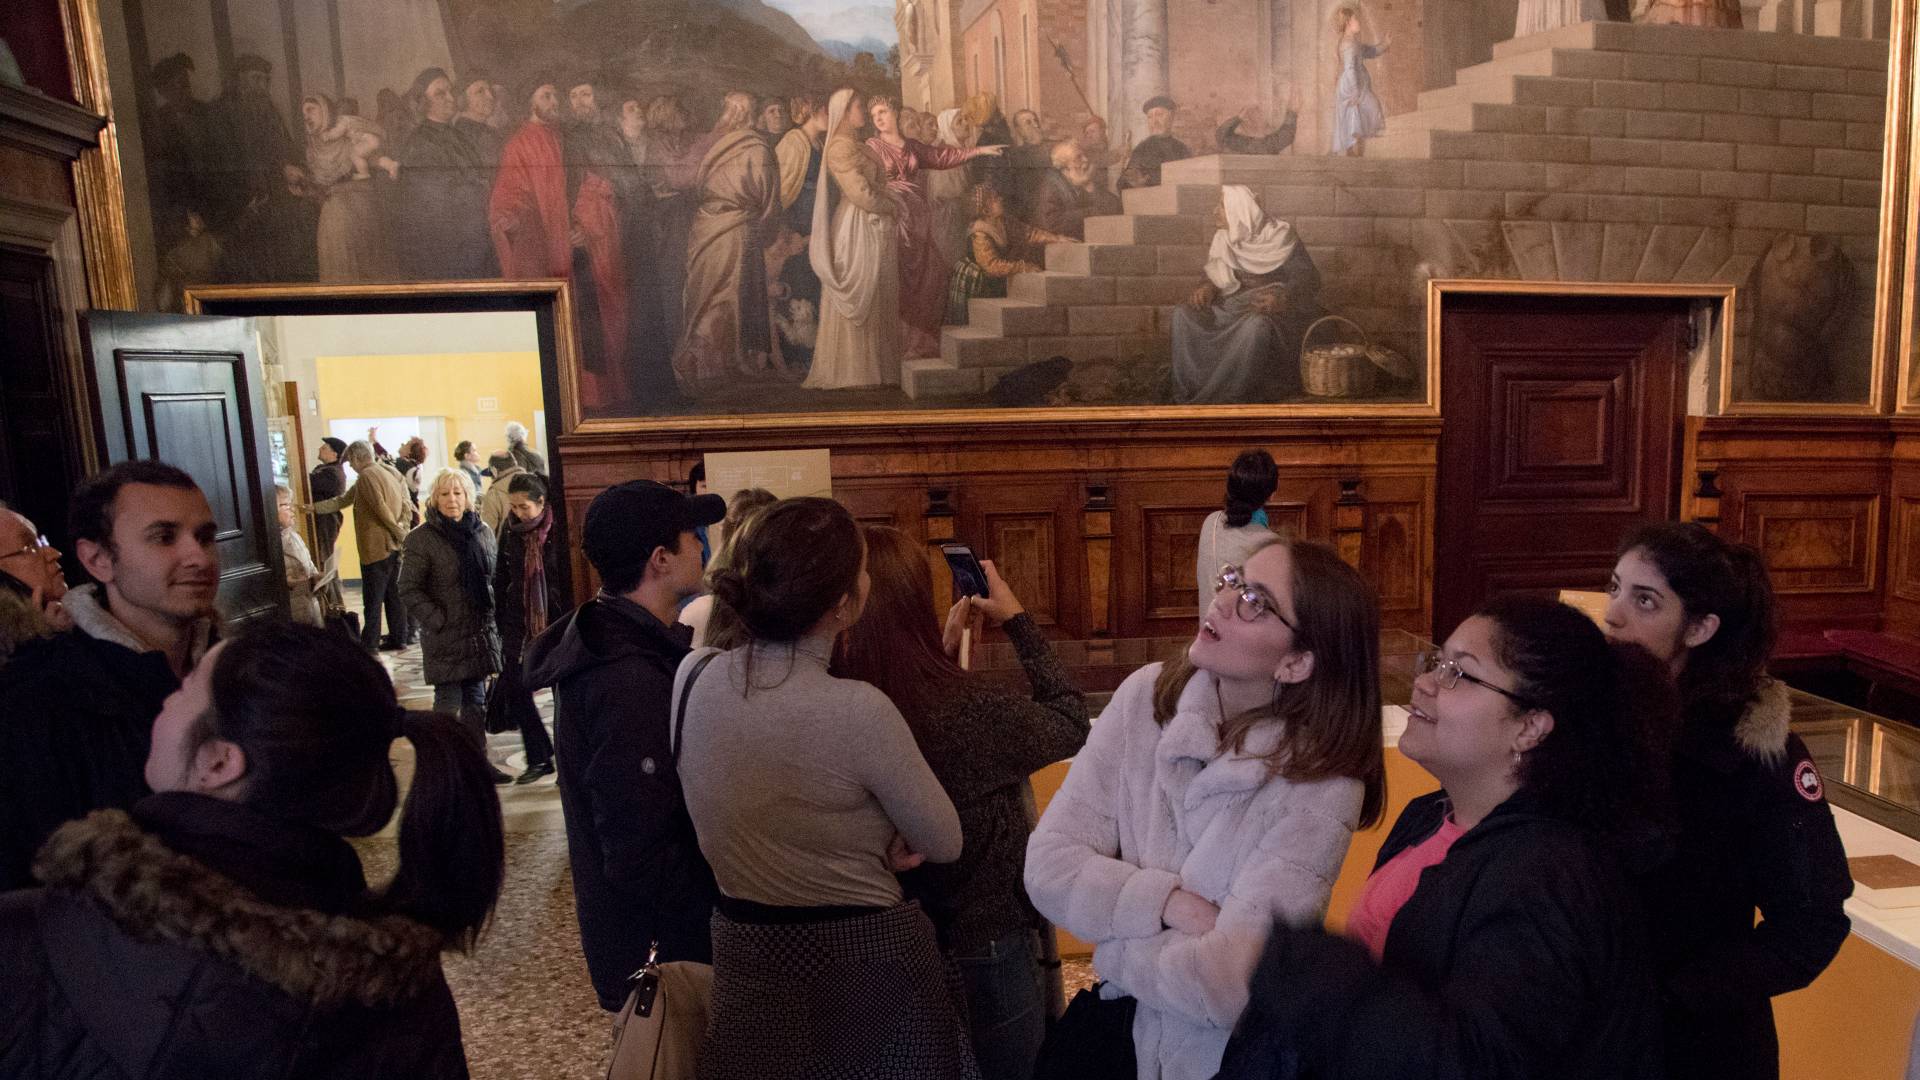 Students looking up at artwork in Gallerie dell'Accademia in Venice